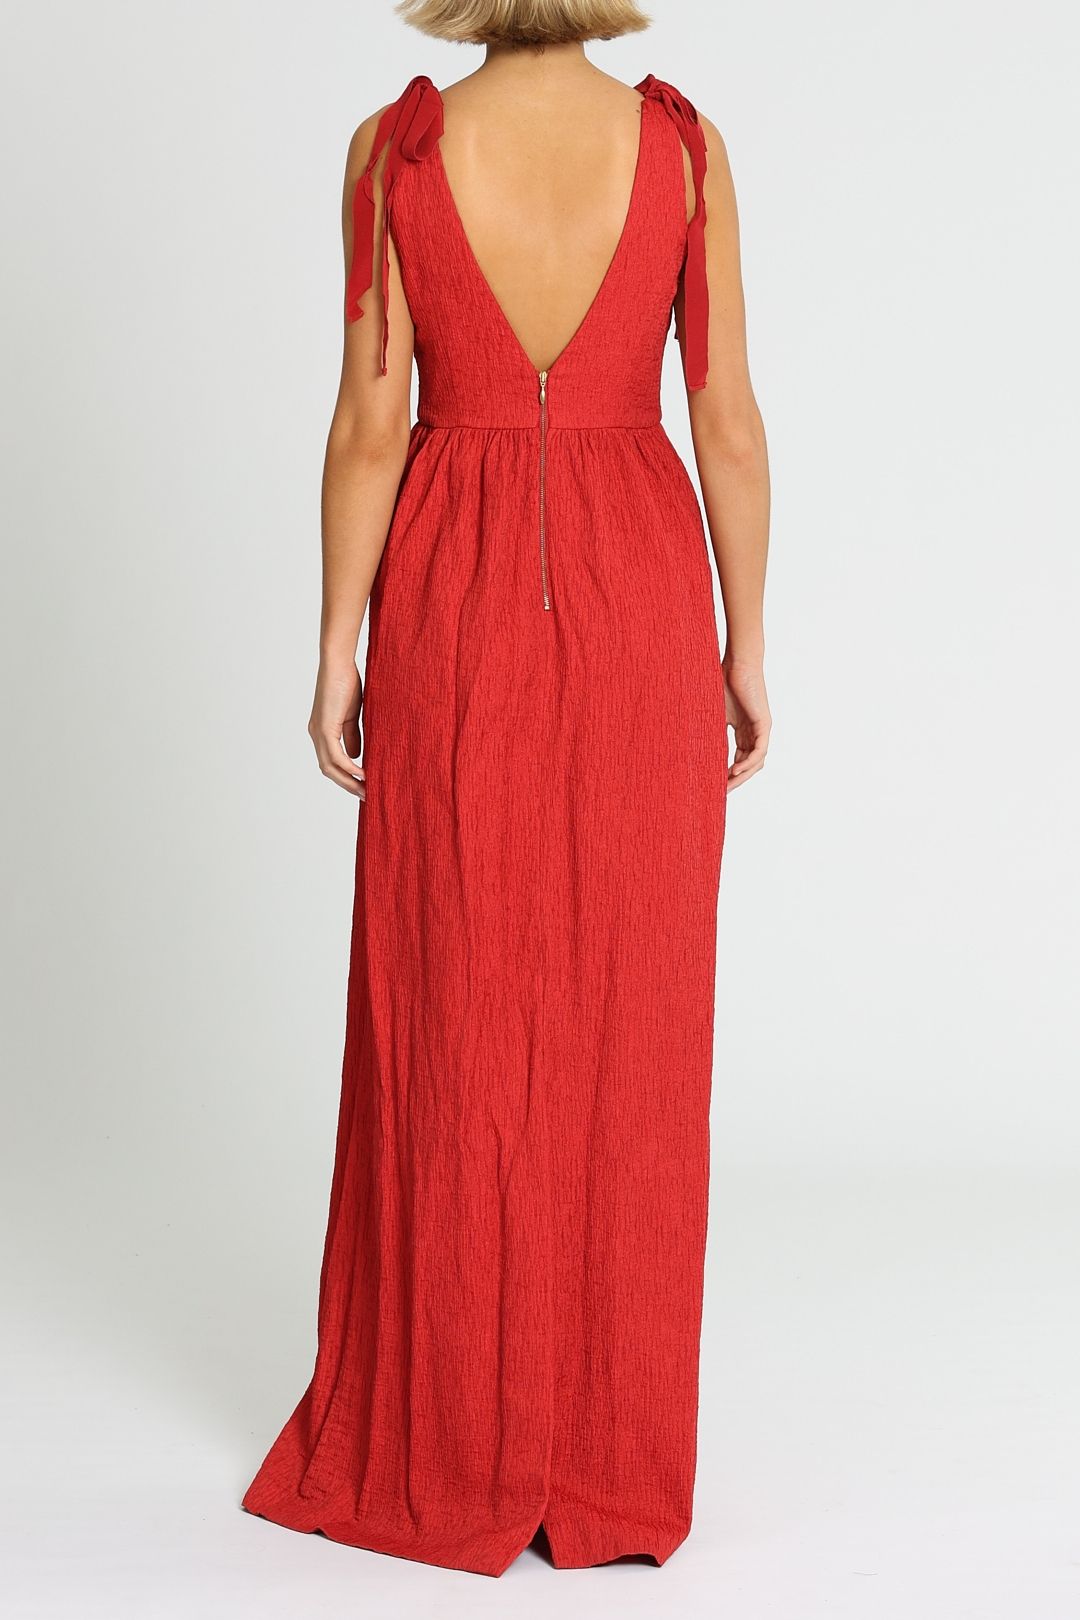 Rebecca Vallance Harlow Tie Gown Red Backless